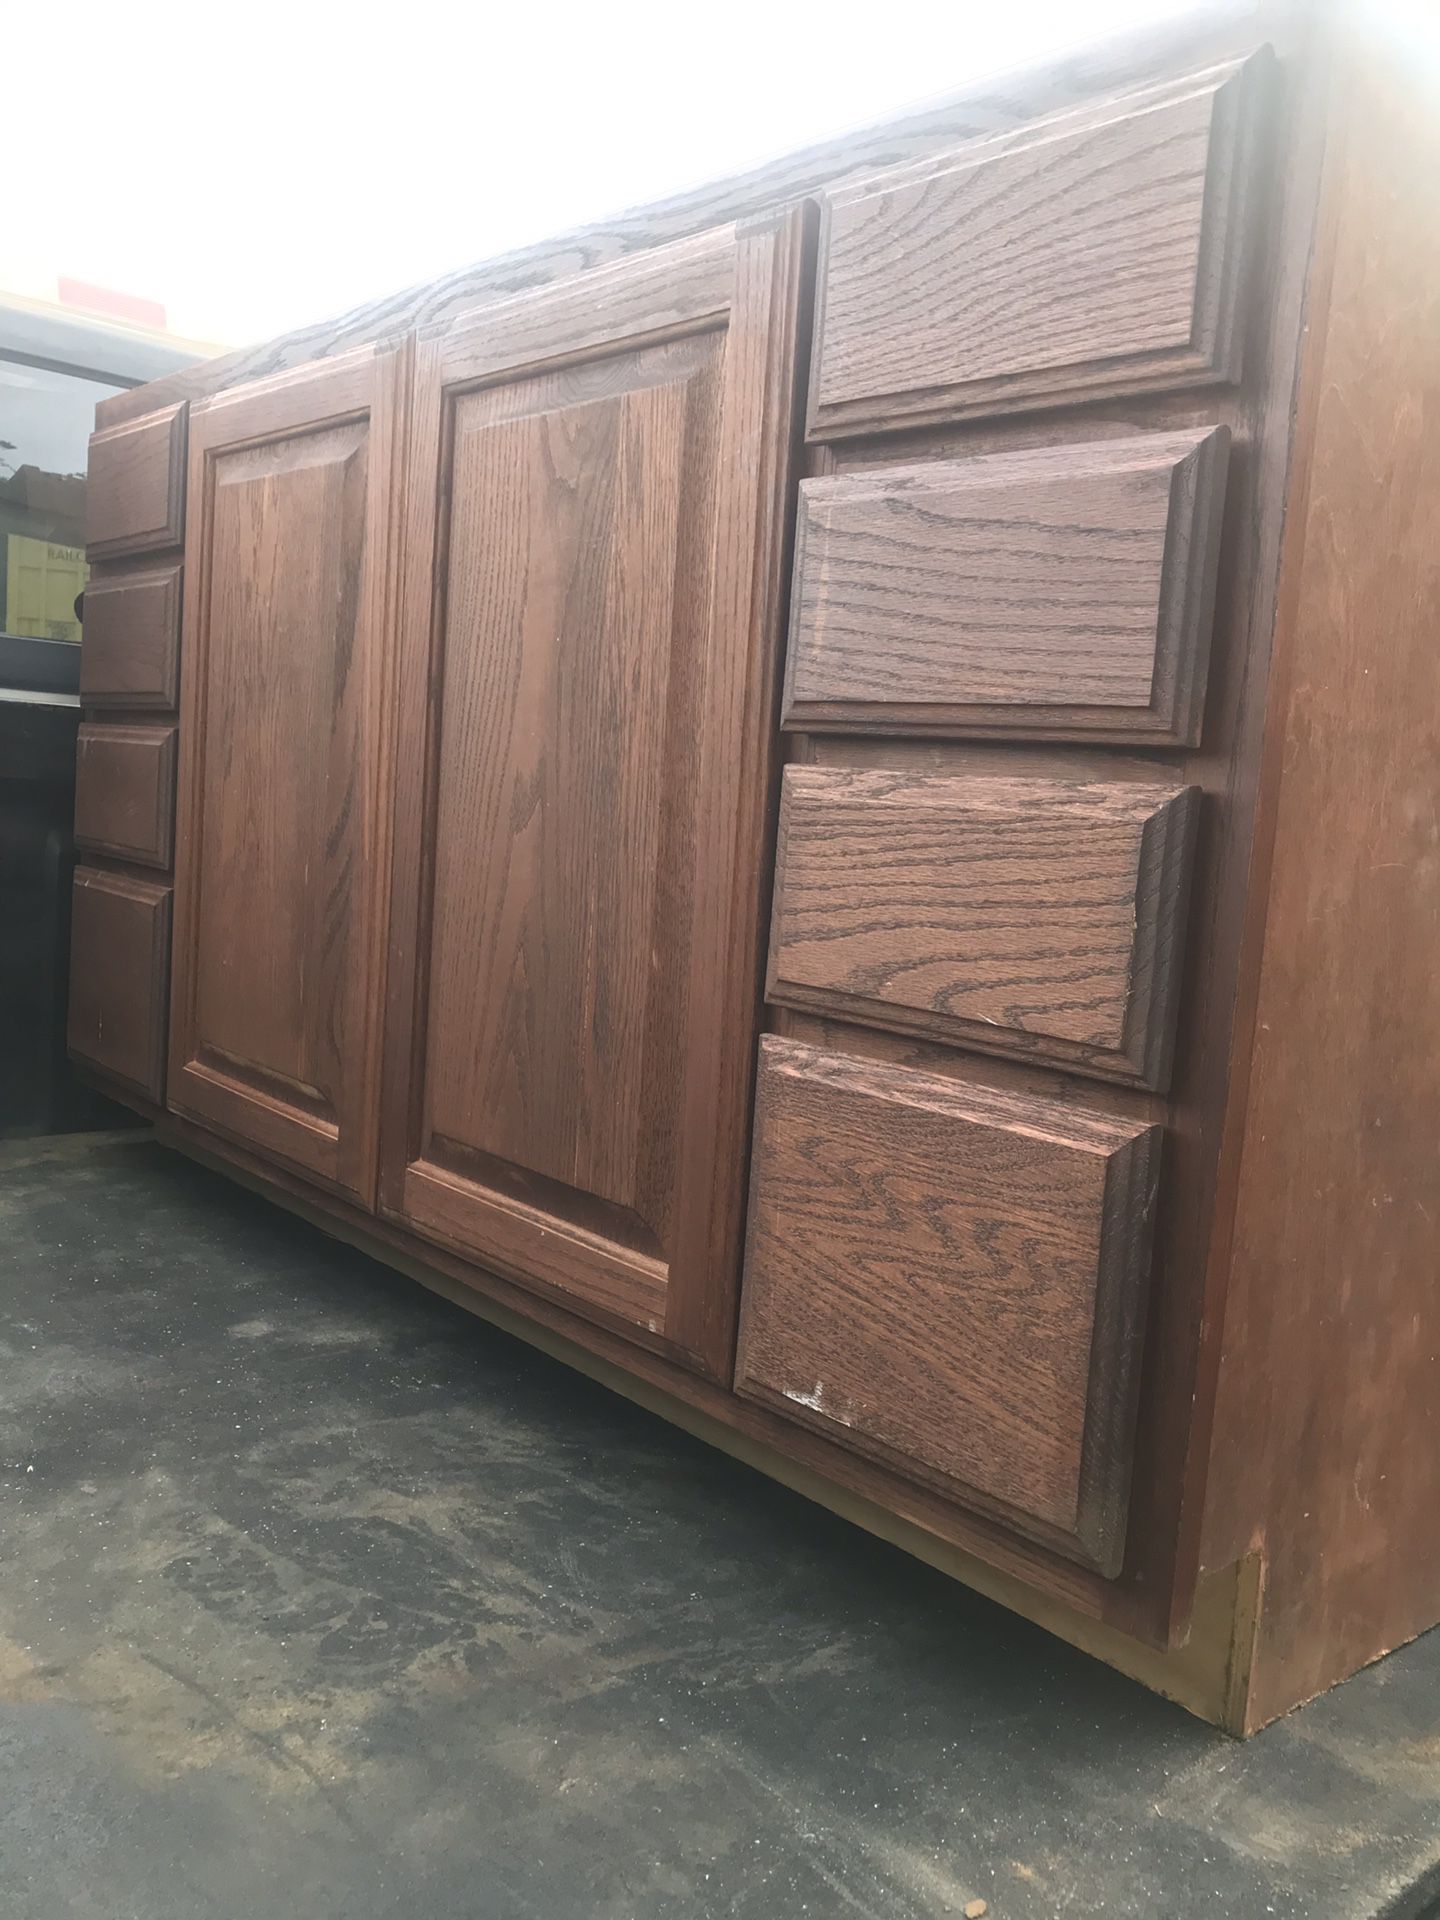 Mahogany brown cabinet with White stove top and island For kitchen